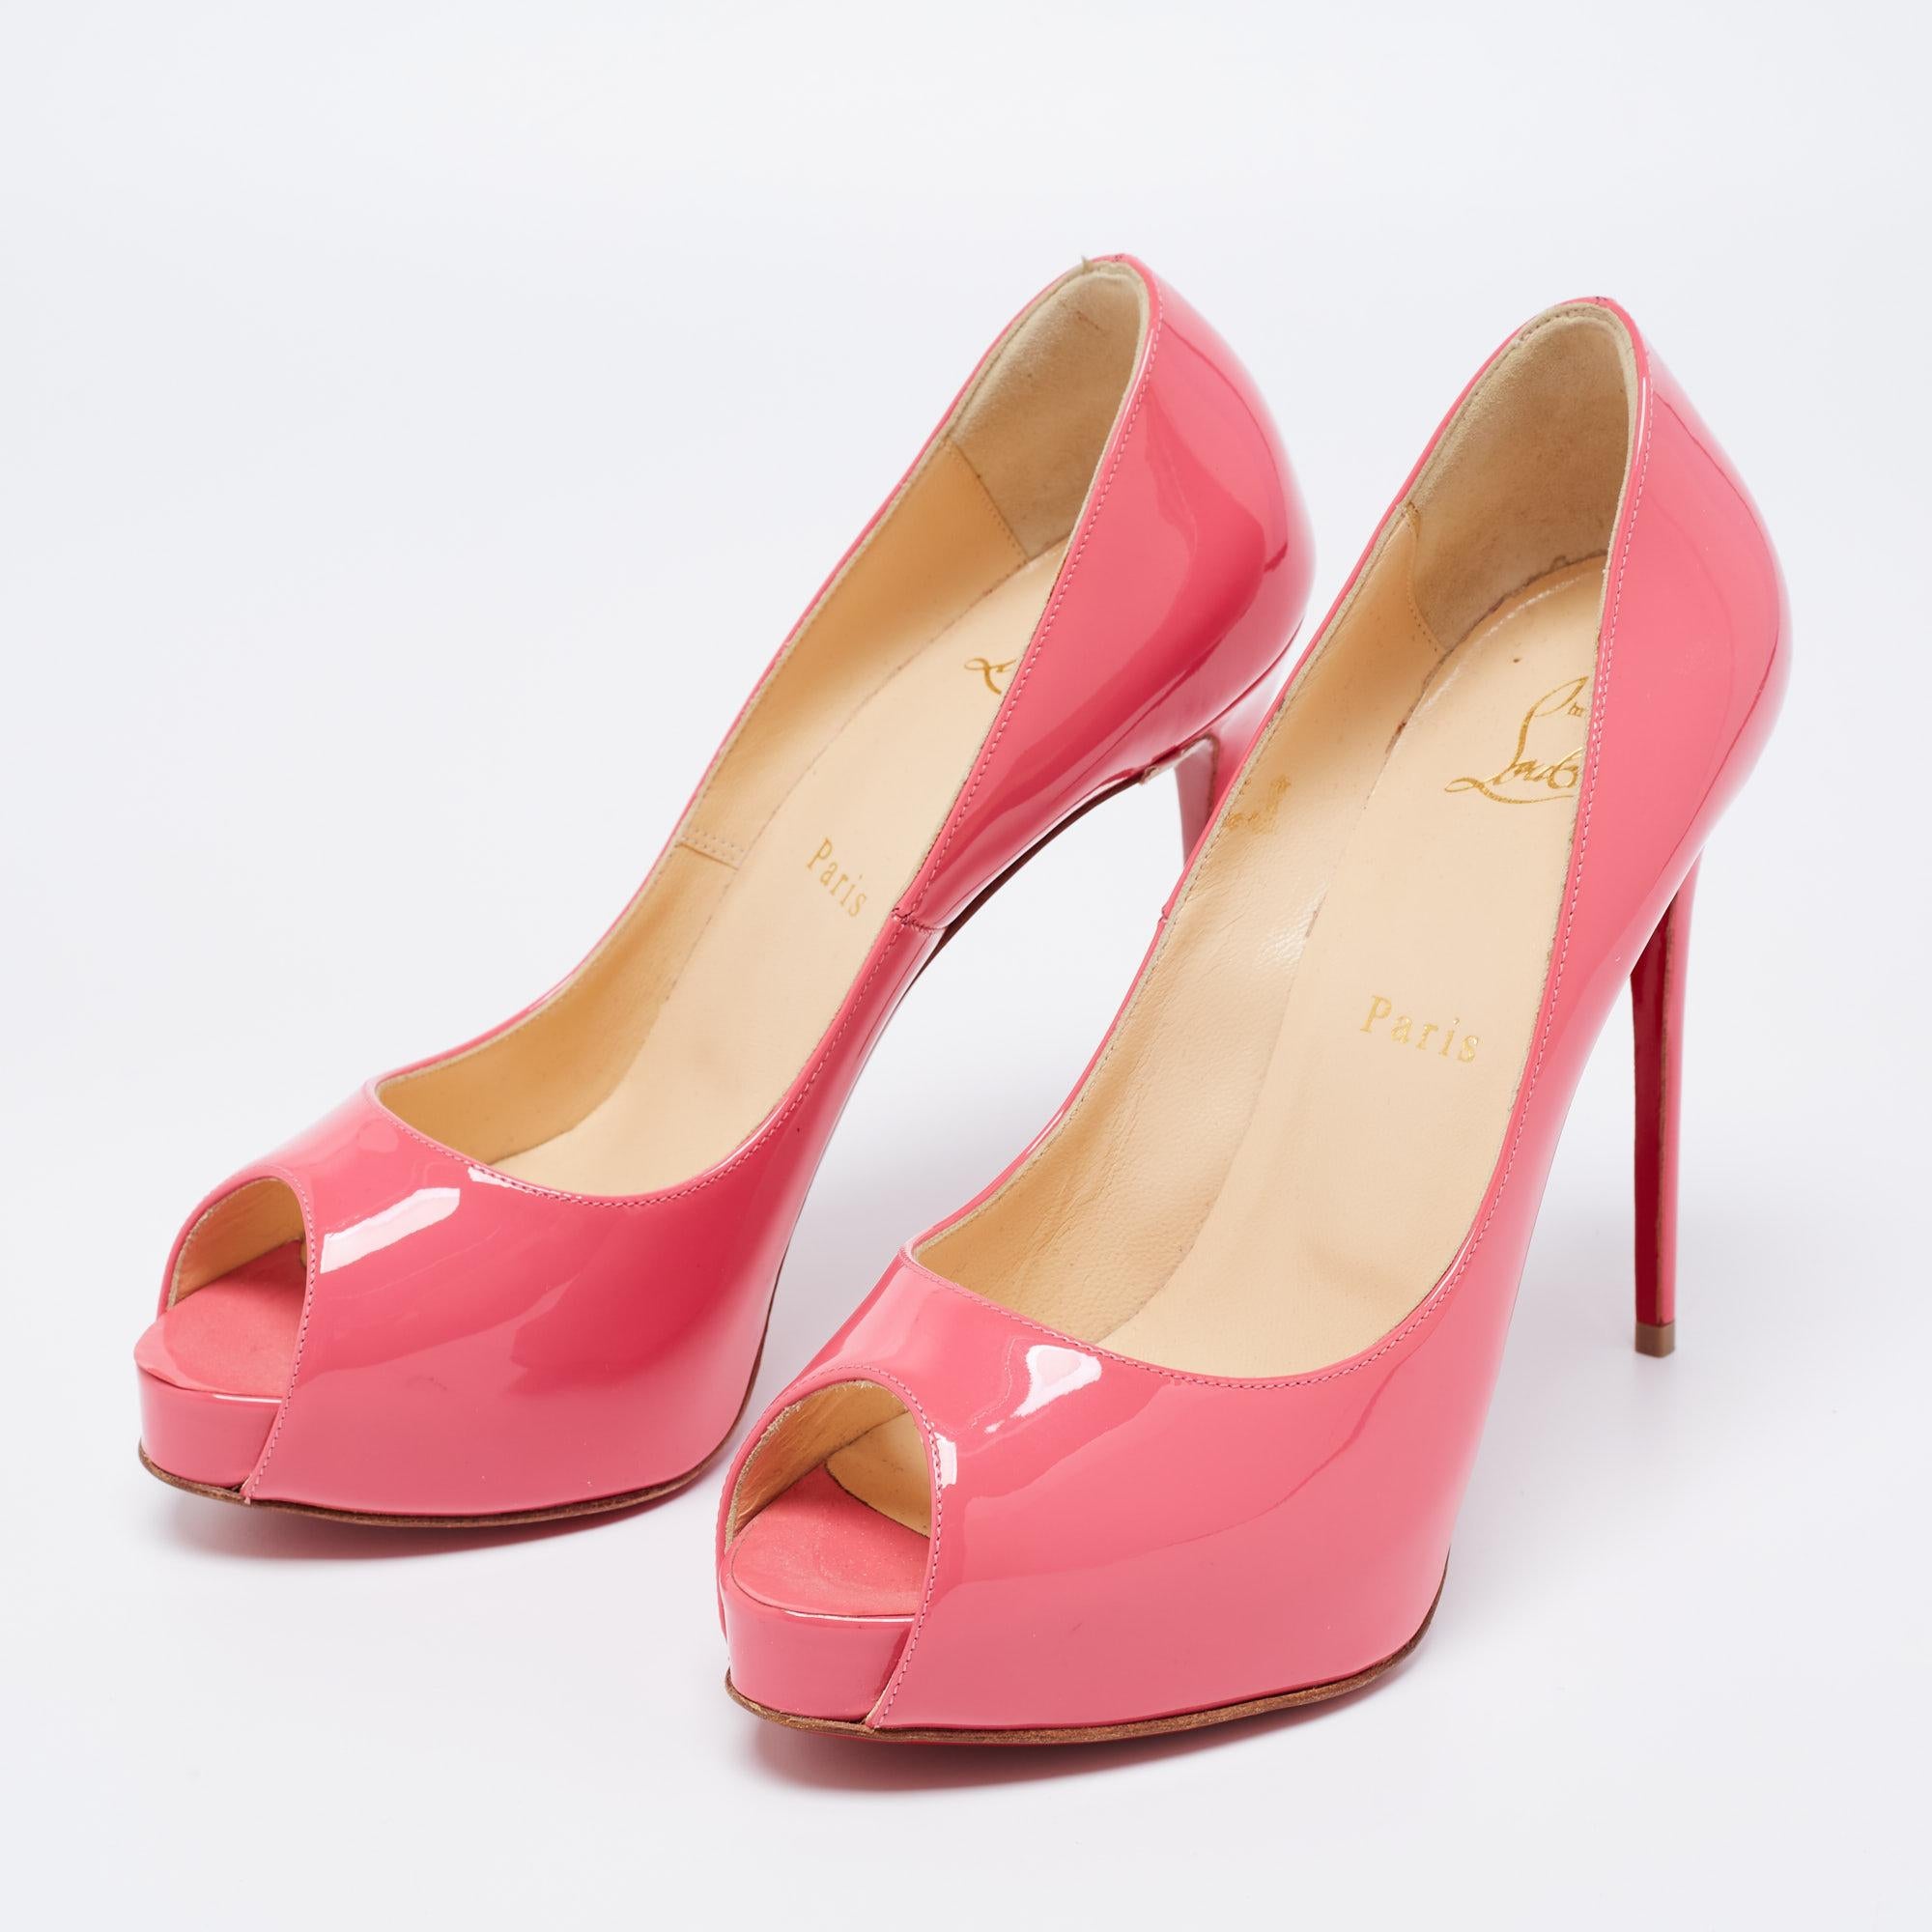 Christian Louboutin Pink Patent Leather New Very Prive Peep-Toe Pumps Size 37.5 For Sale 4